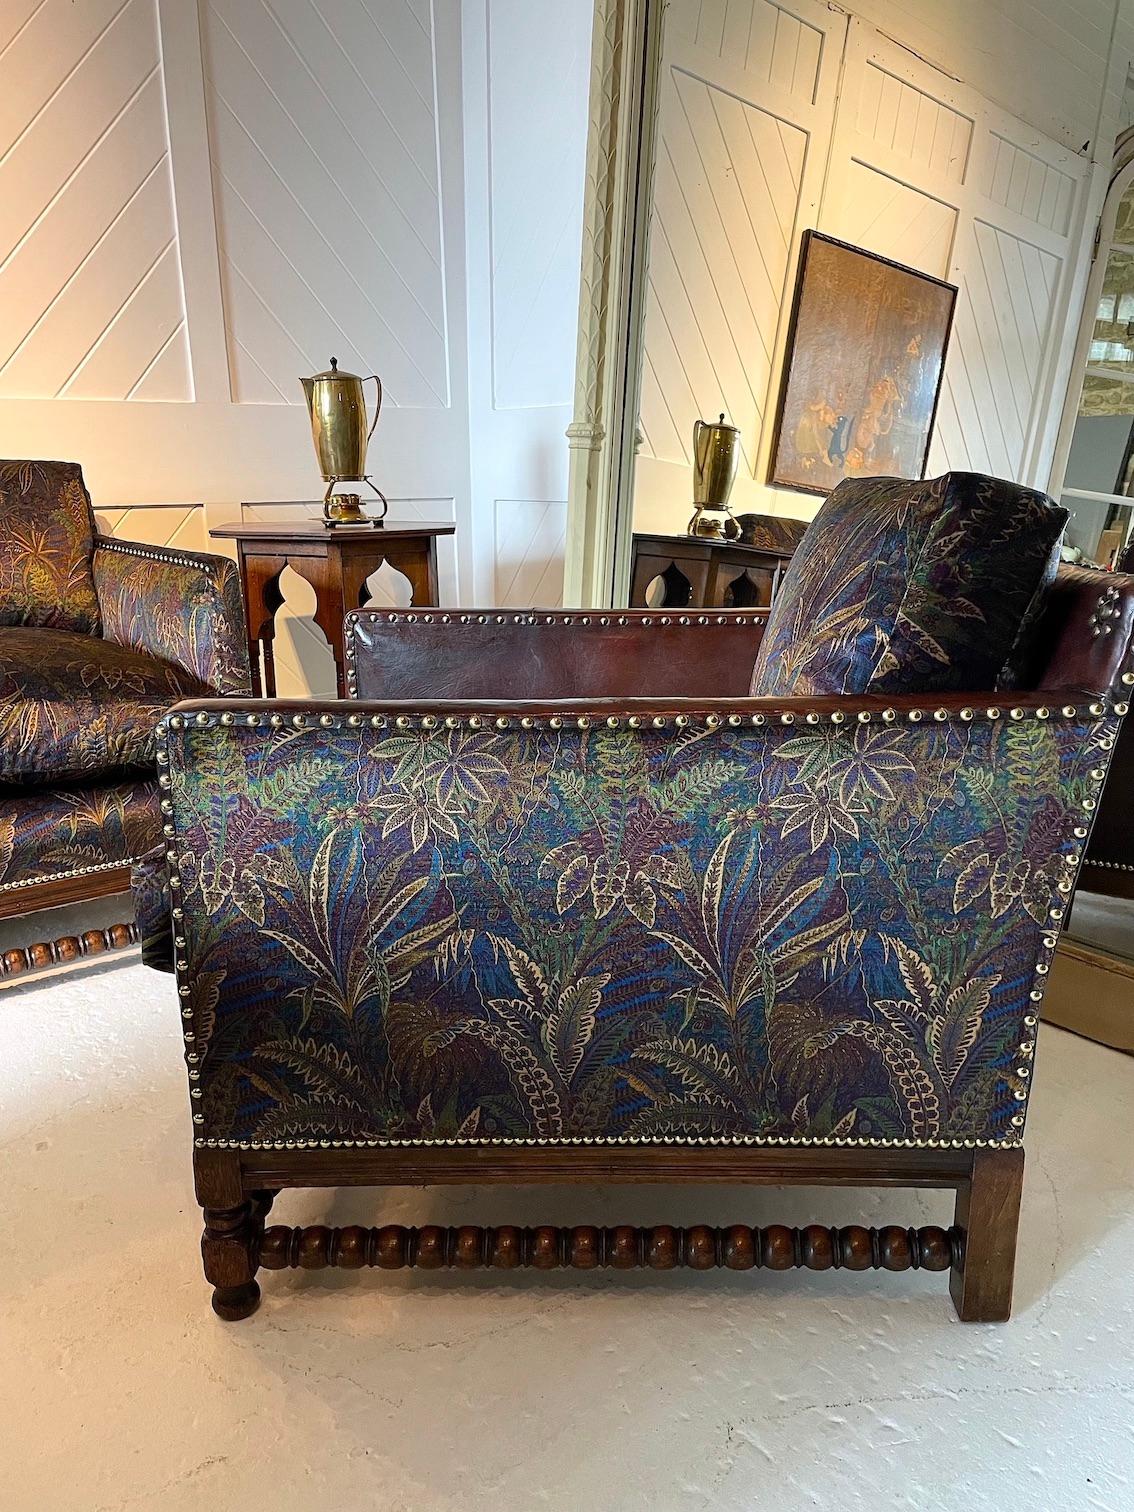 Exceptional quality oak framed, bobbin turned armchair with decorative brass stud work.
Original leather with re-upholstery using Liberty velvet fabric ‘Shand Voyage, Winter’
This was possibly retailed by Liberty & Co
circa 1915

Matching